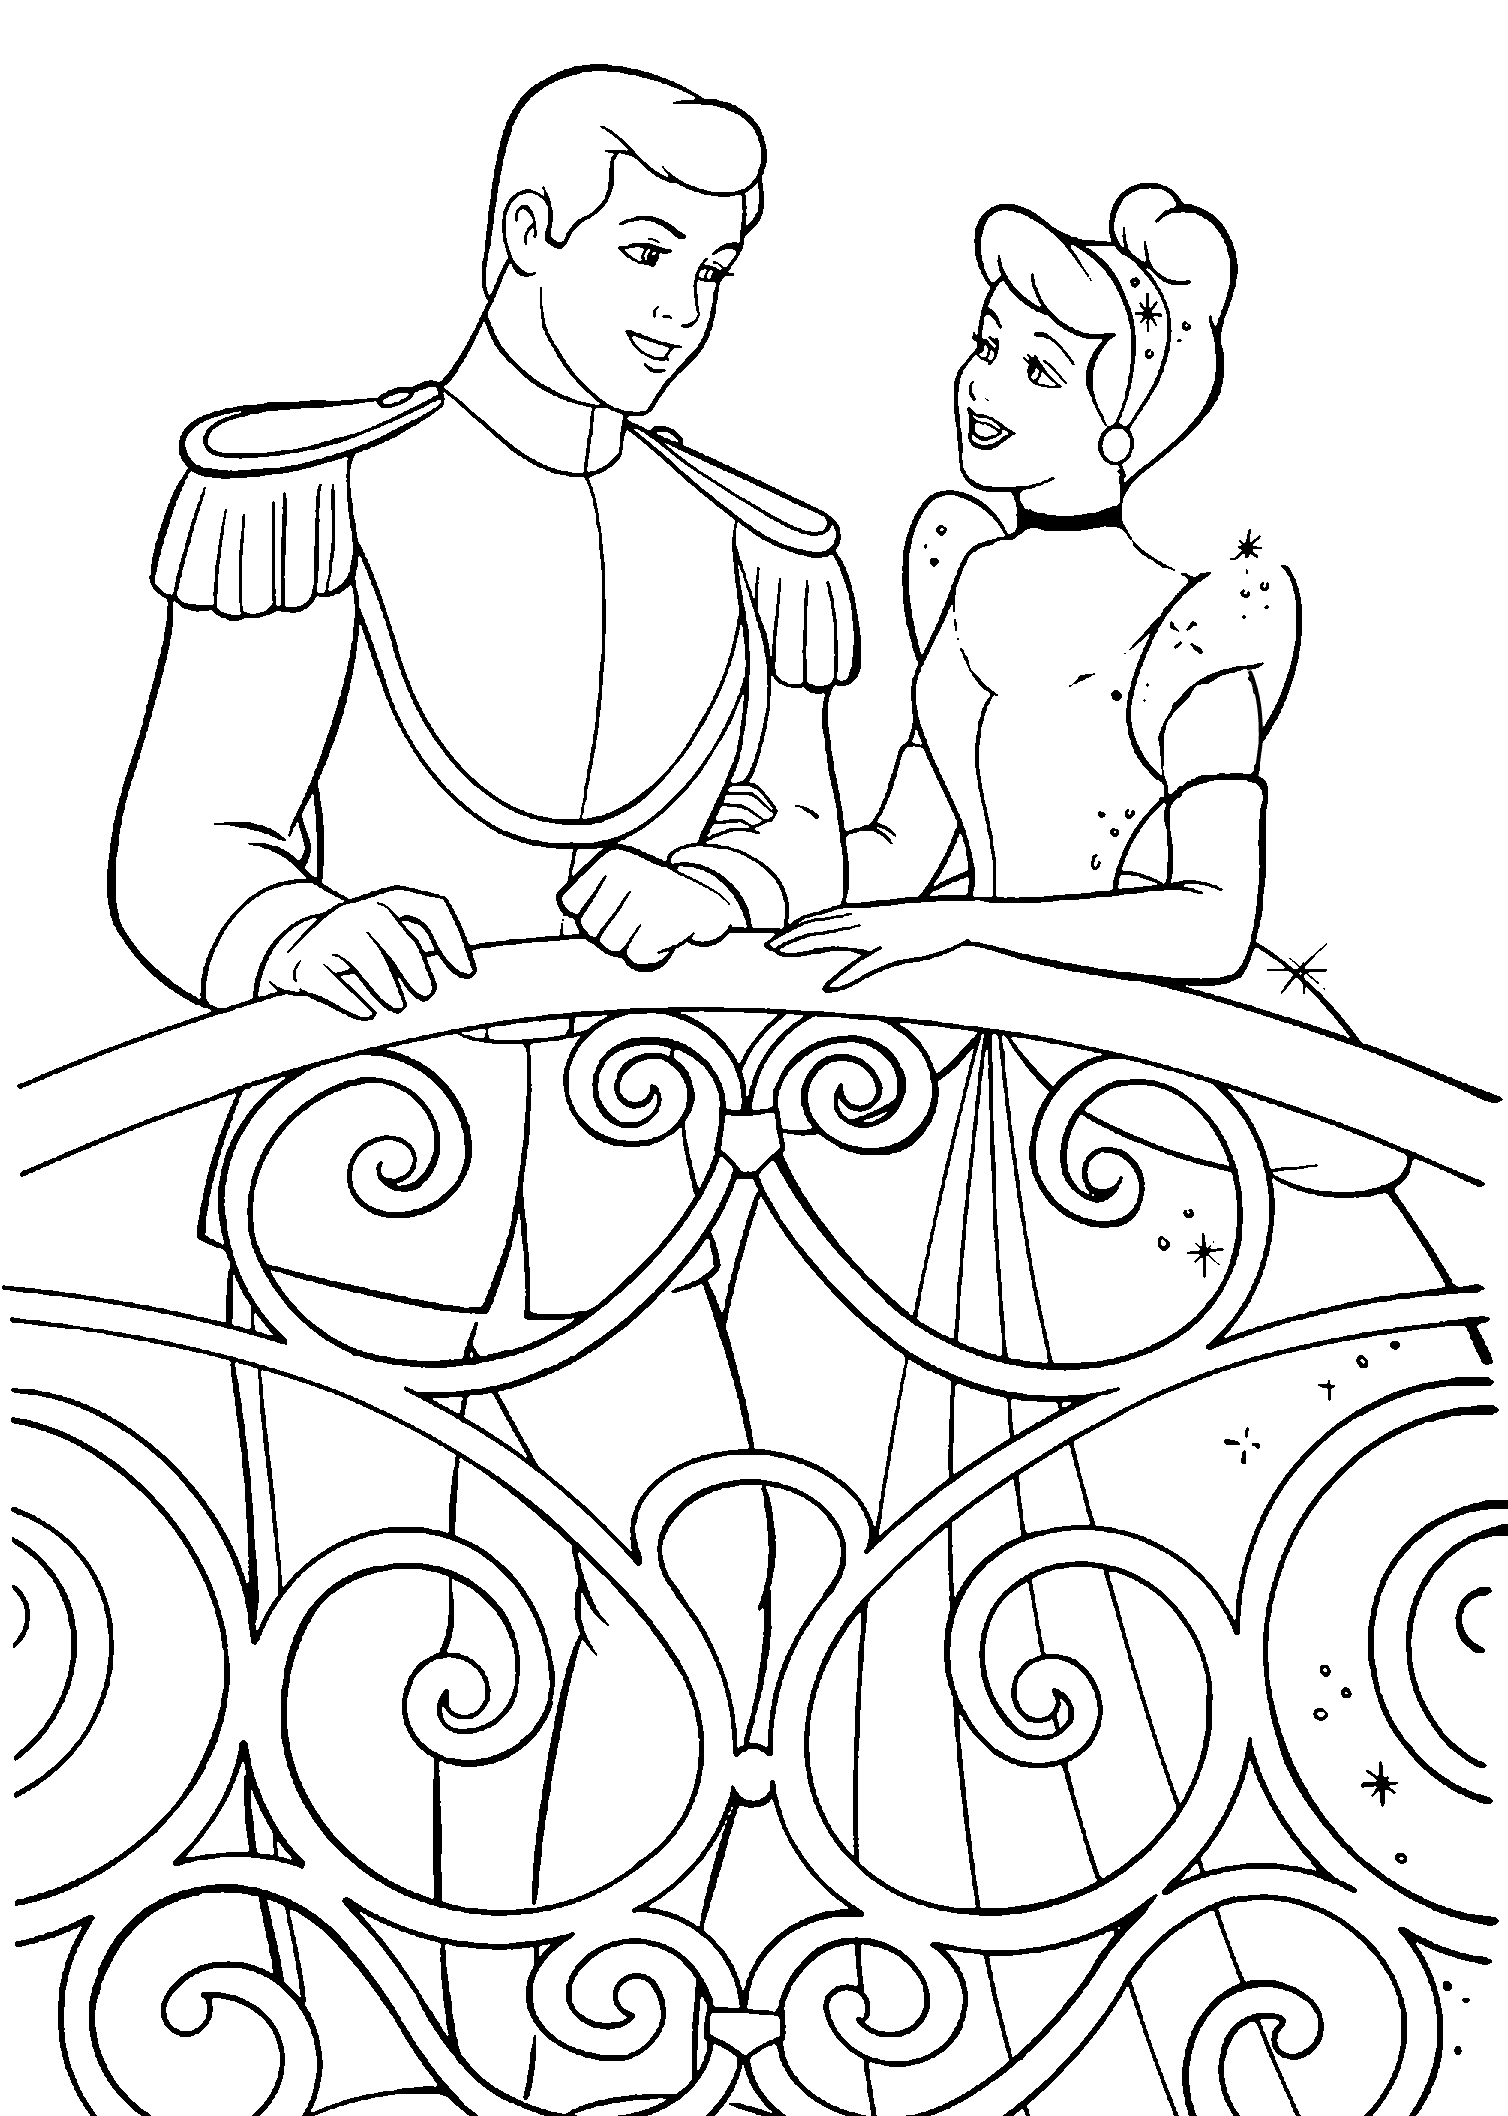 Free Printable Disney Princess Coloring Pages For Kids Coloring Wallpapers Download Free Images Wallpaper [coloring536.blogspot.com]